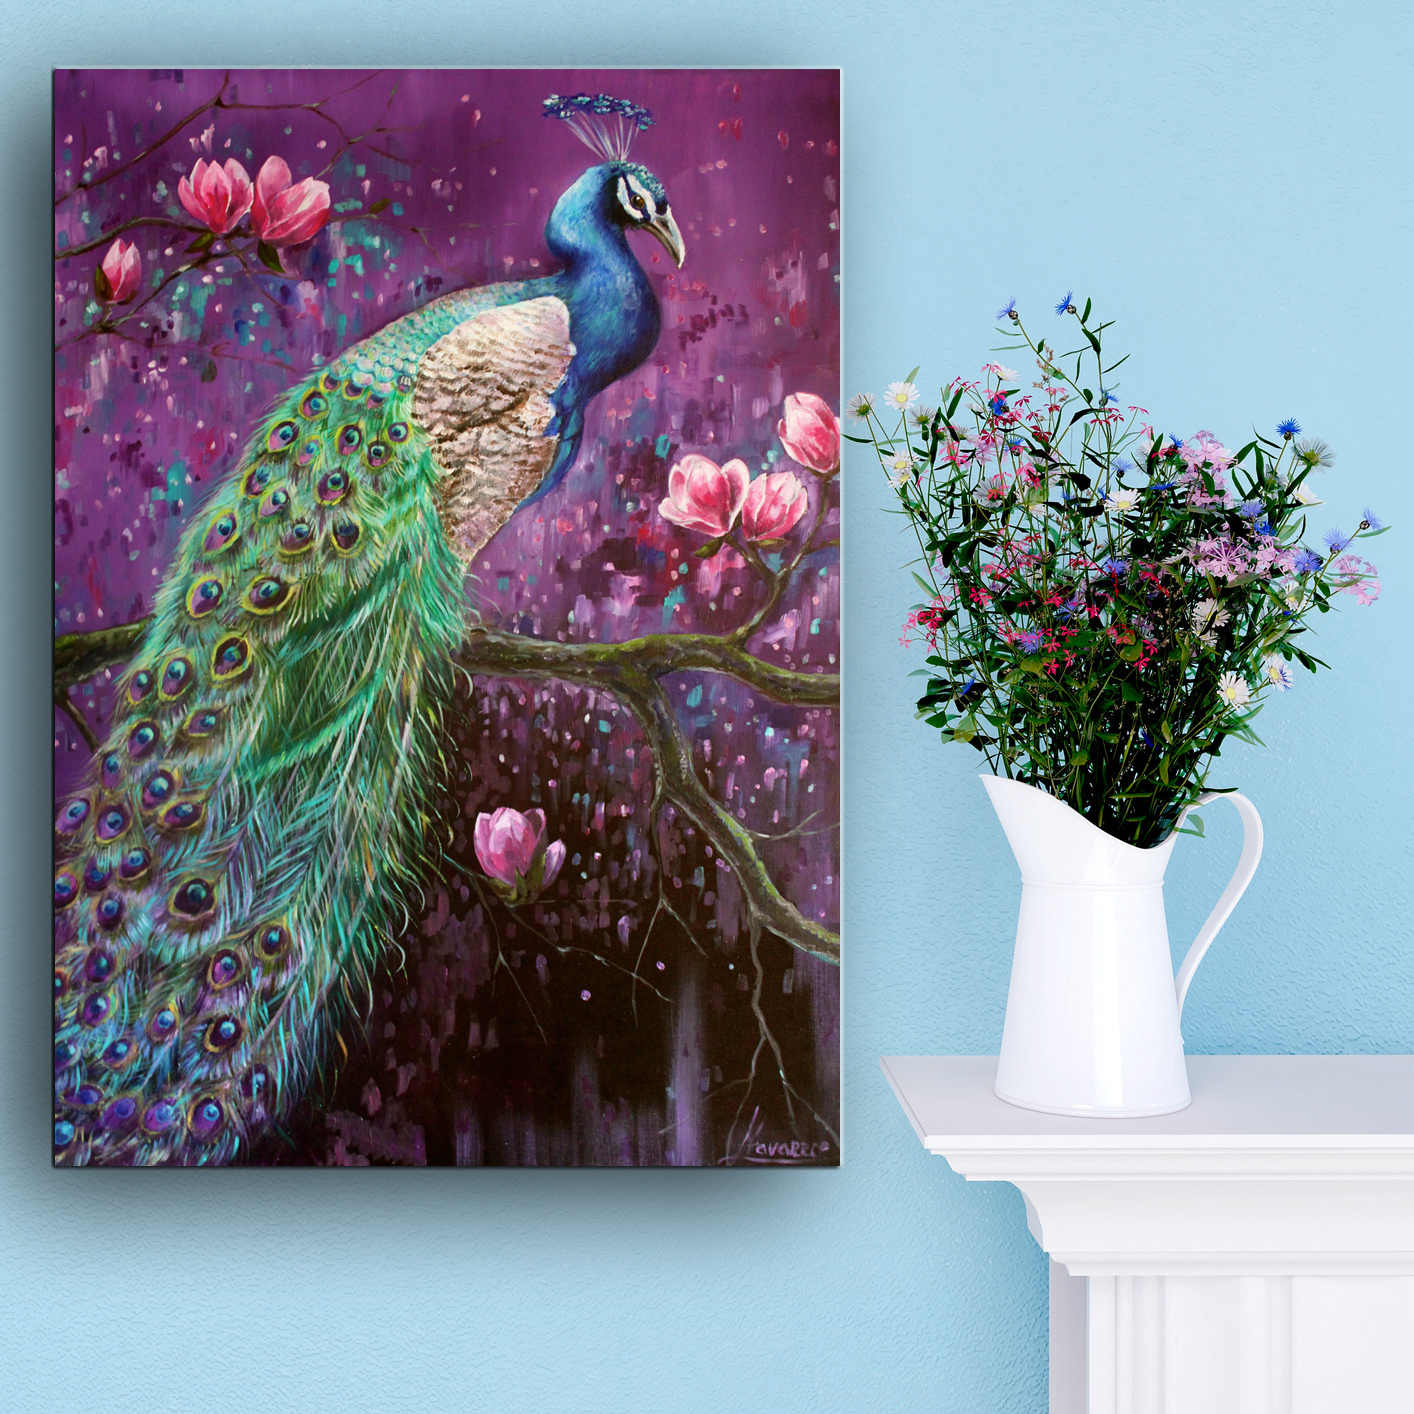 Large Peacock Painting at PaintingValley.com | Explore collection of ...